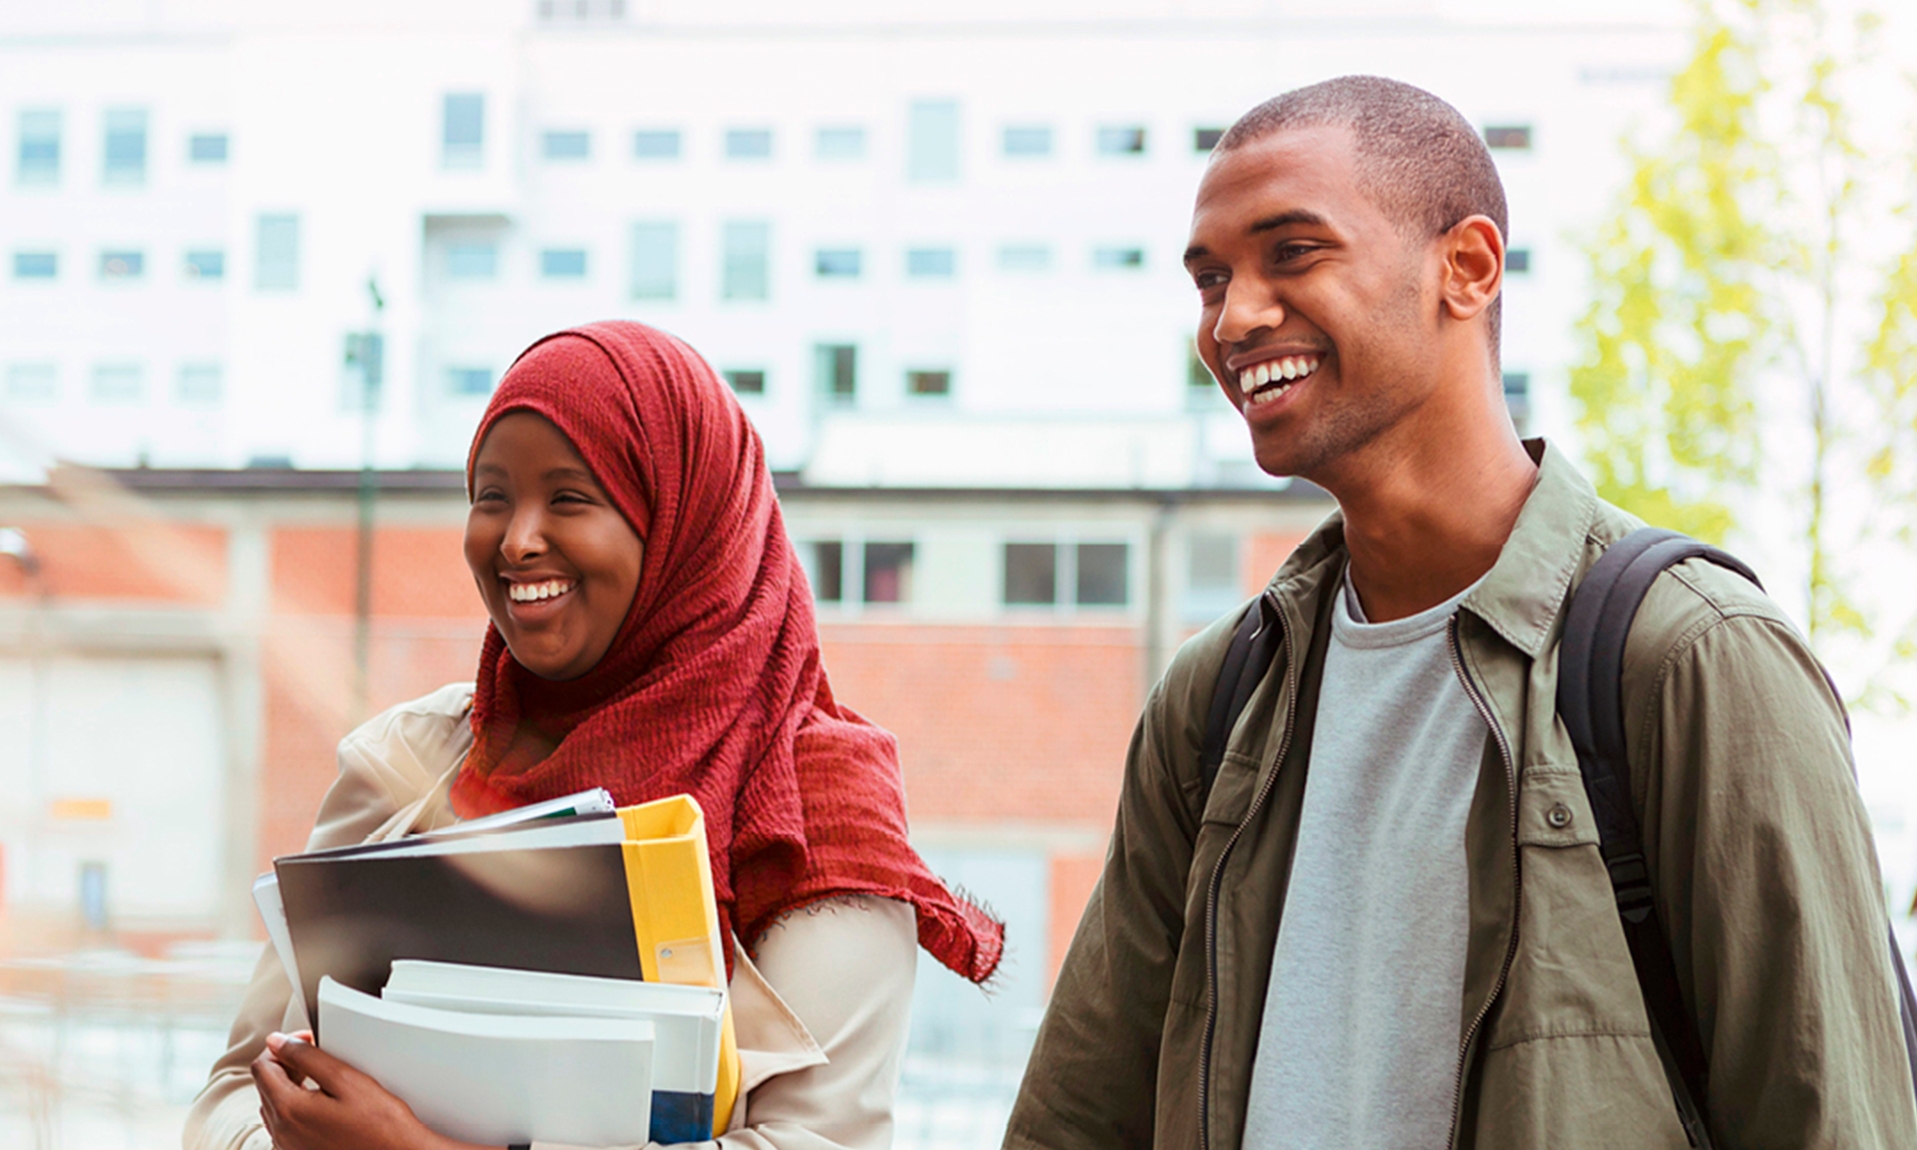 Santander Uk Launches Black Inclusion Programme For Students And Recent Graduates Across The Uk